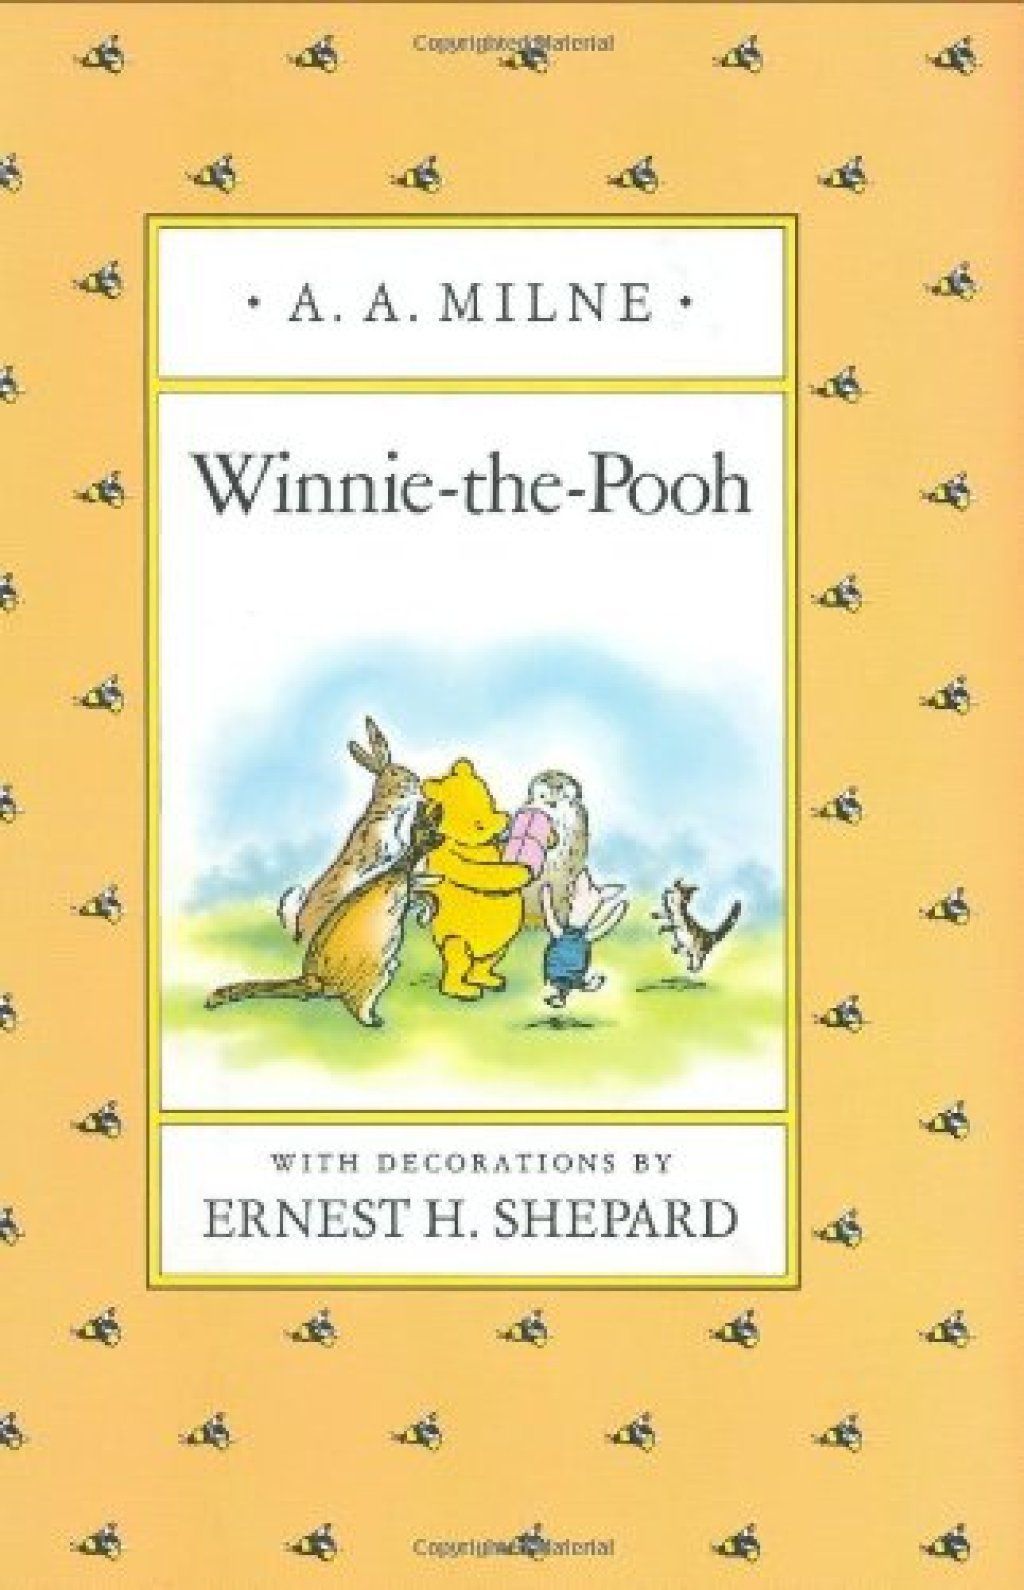 Winnie-the-Pooh A.A. Η Milne ανέκδοτα από τα παιδιά